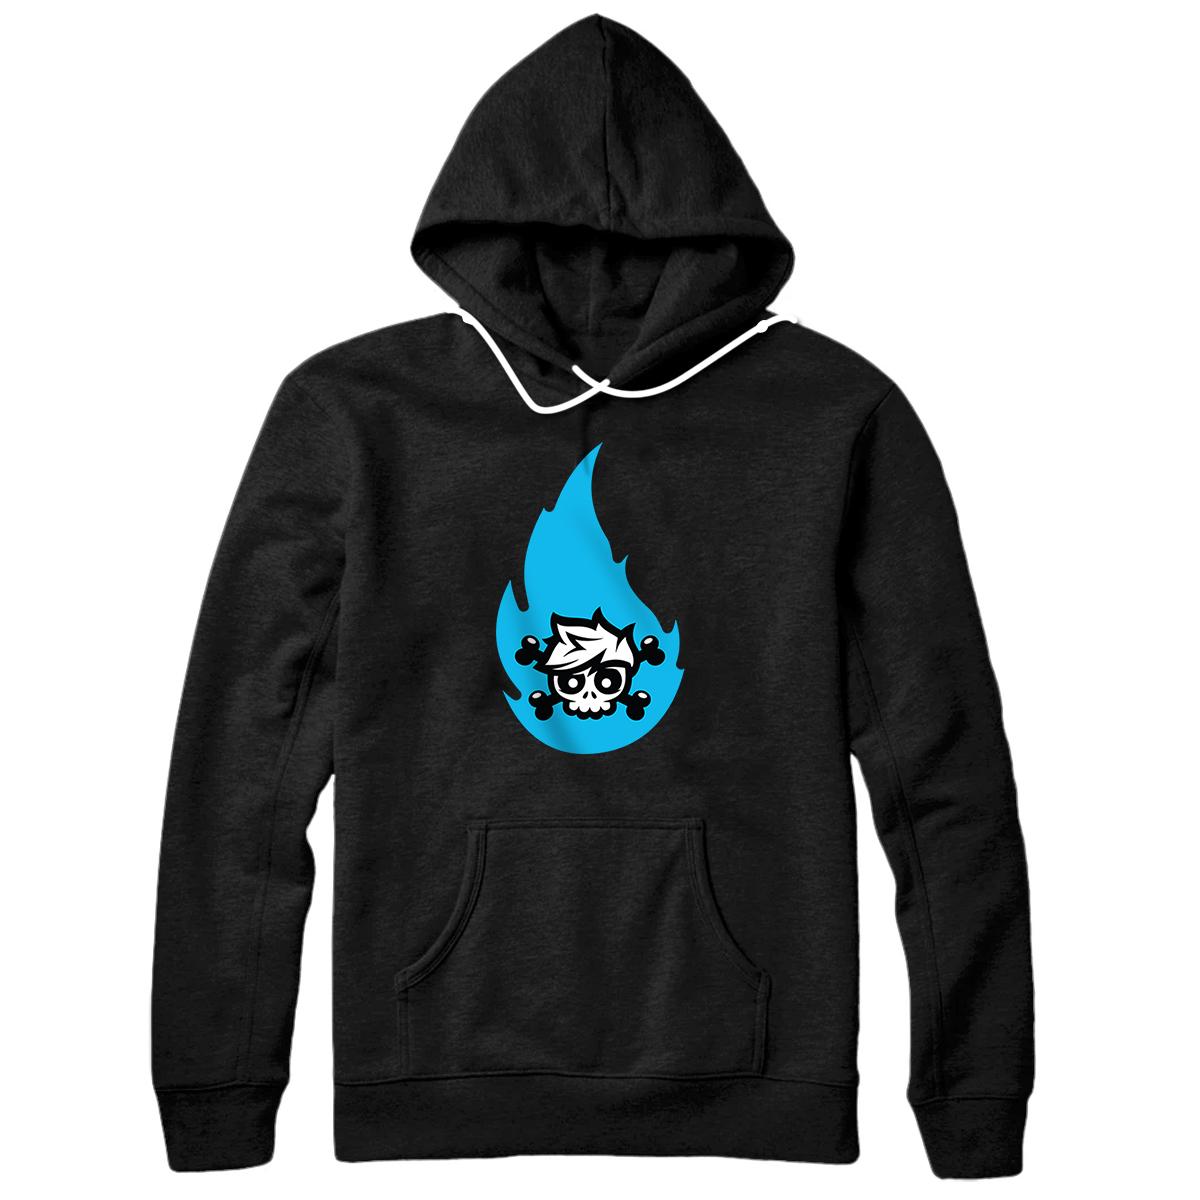 Personalized Crainer Store Merchandise Exclusive Logo With Fire Pullover Hoodie